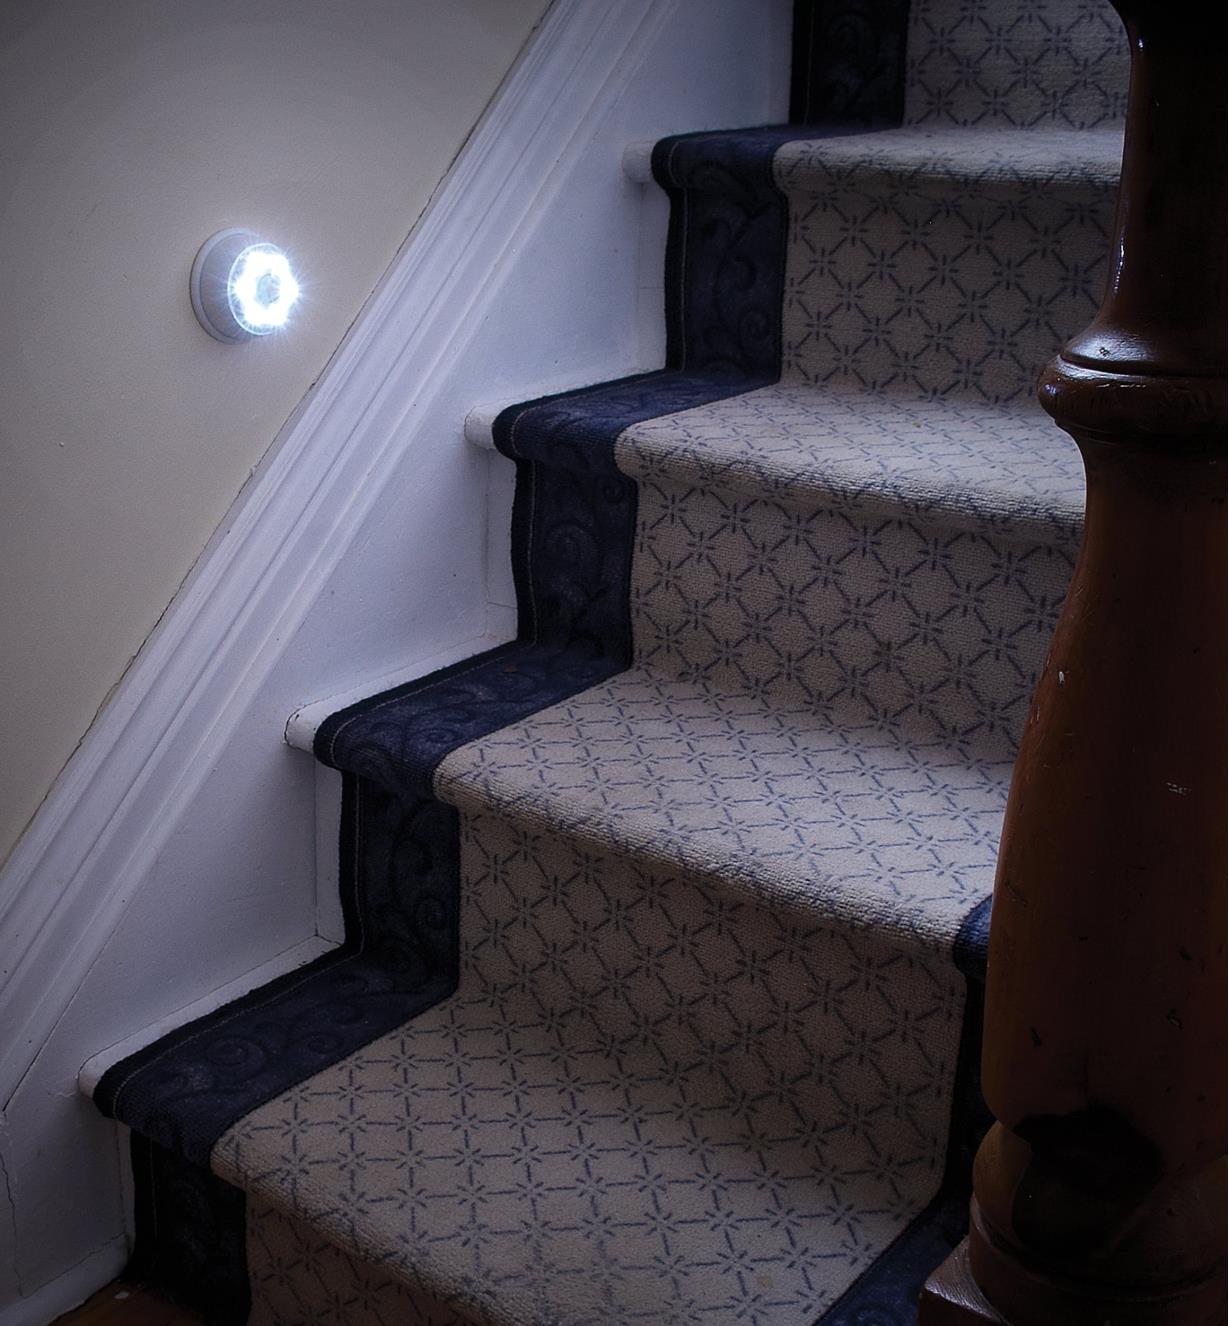 LED Infrared Detection Light mounted next to stairs